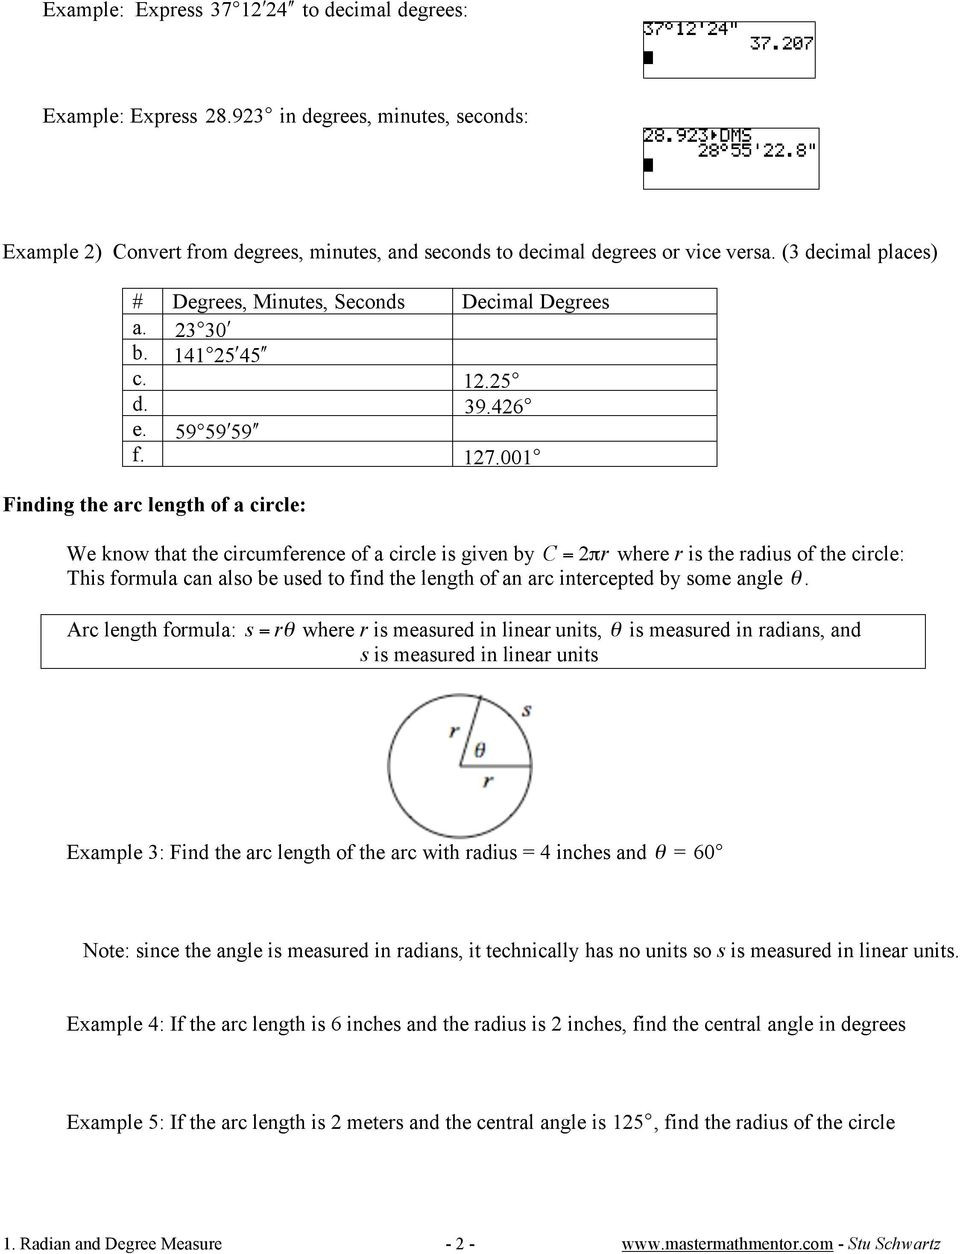 Radians to Degrees Worksheet Unit 1 Radian and Degree Measure Classwork Pdf Free Download